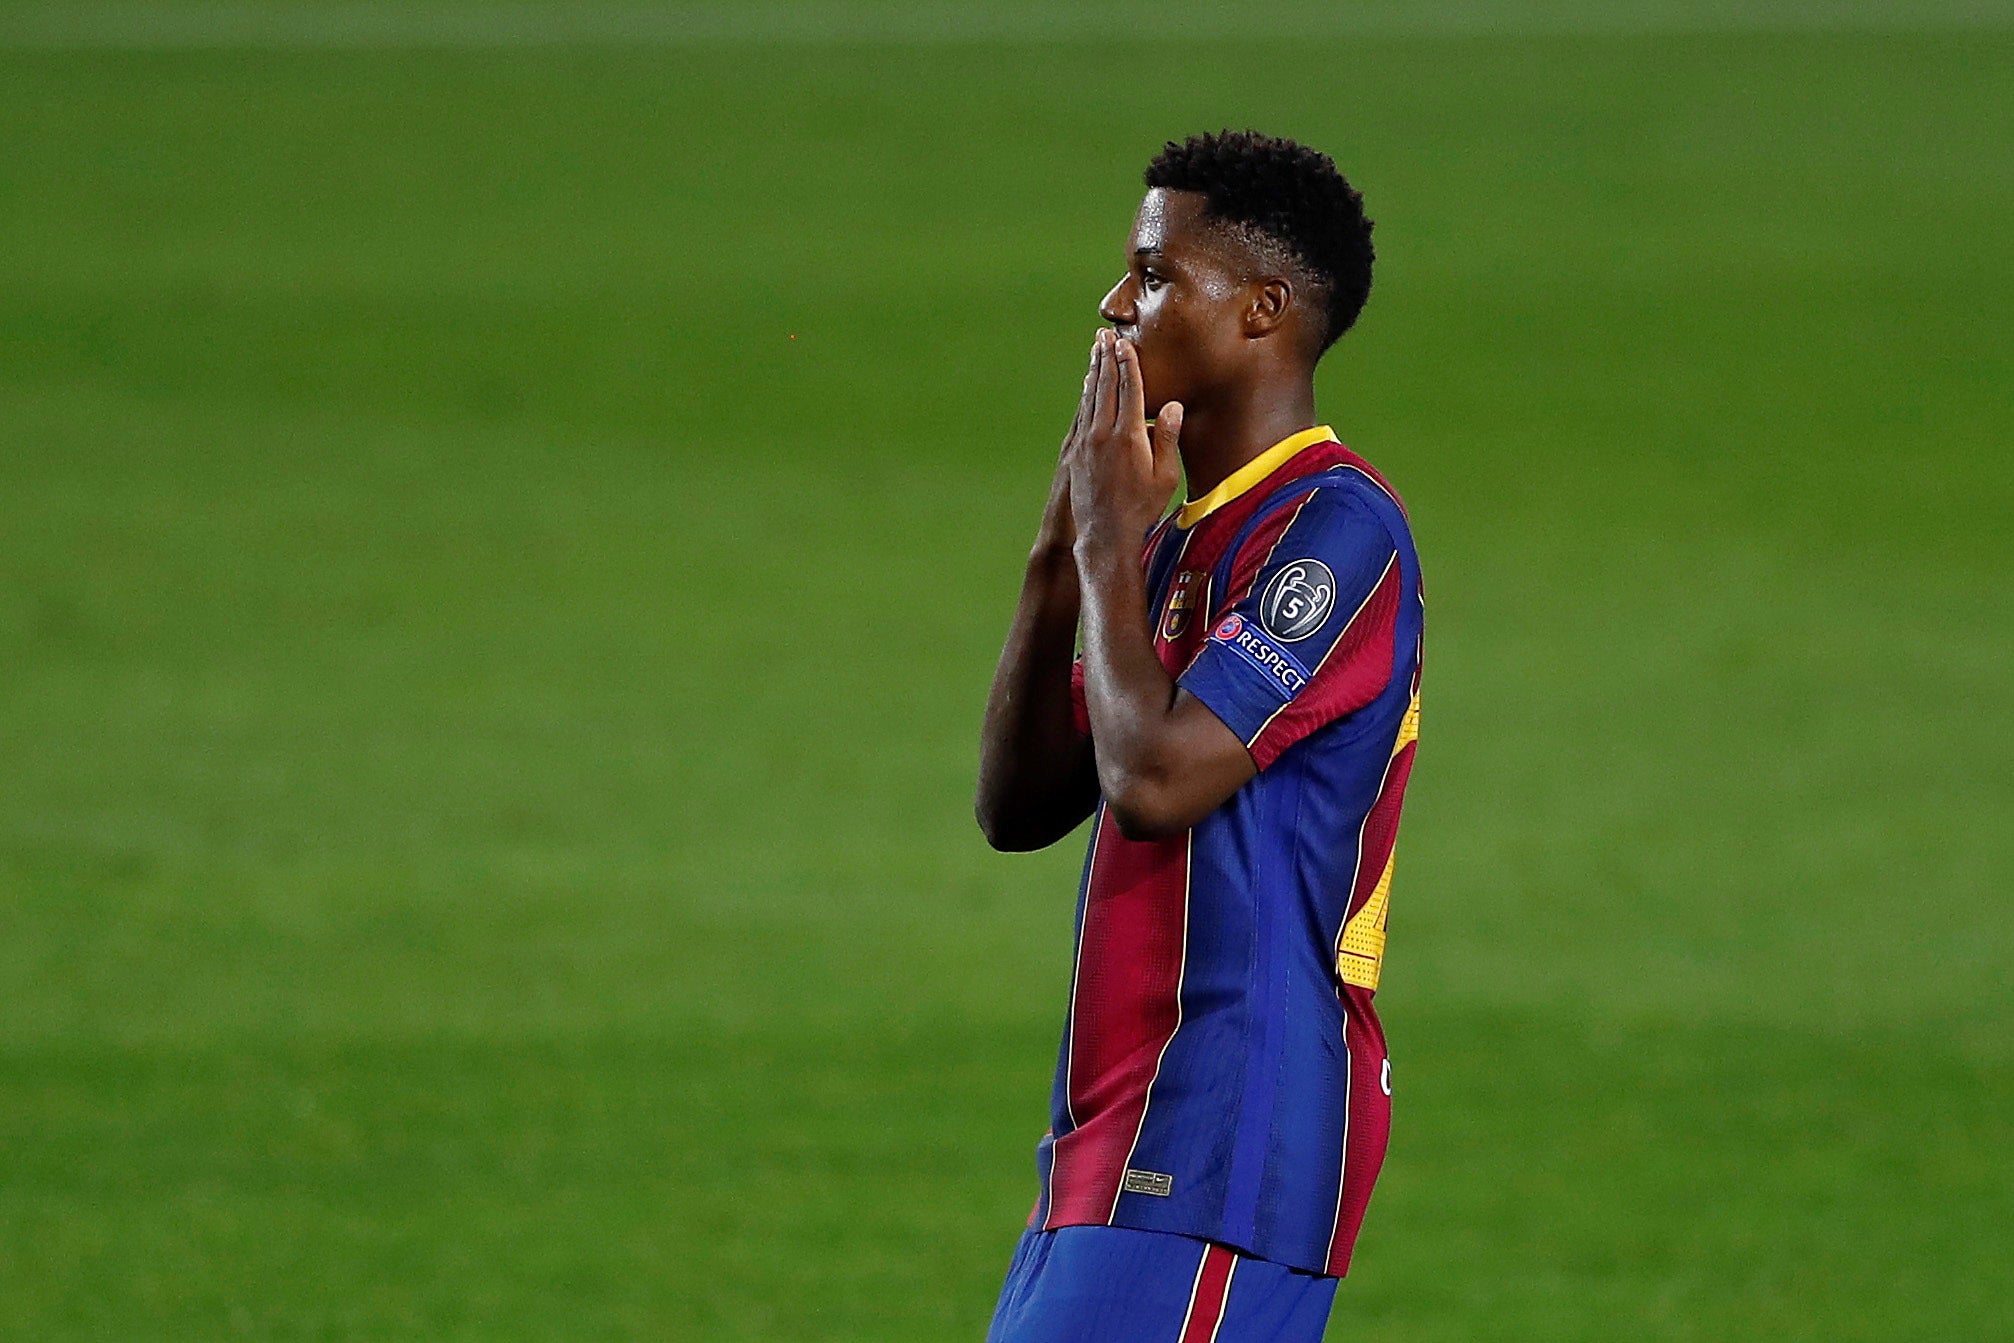 Barcelona’s Ansu Fati was subjected to a racial slur in a Spanish match report